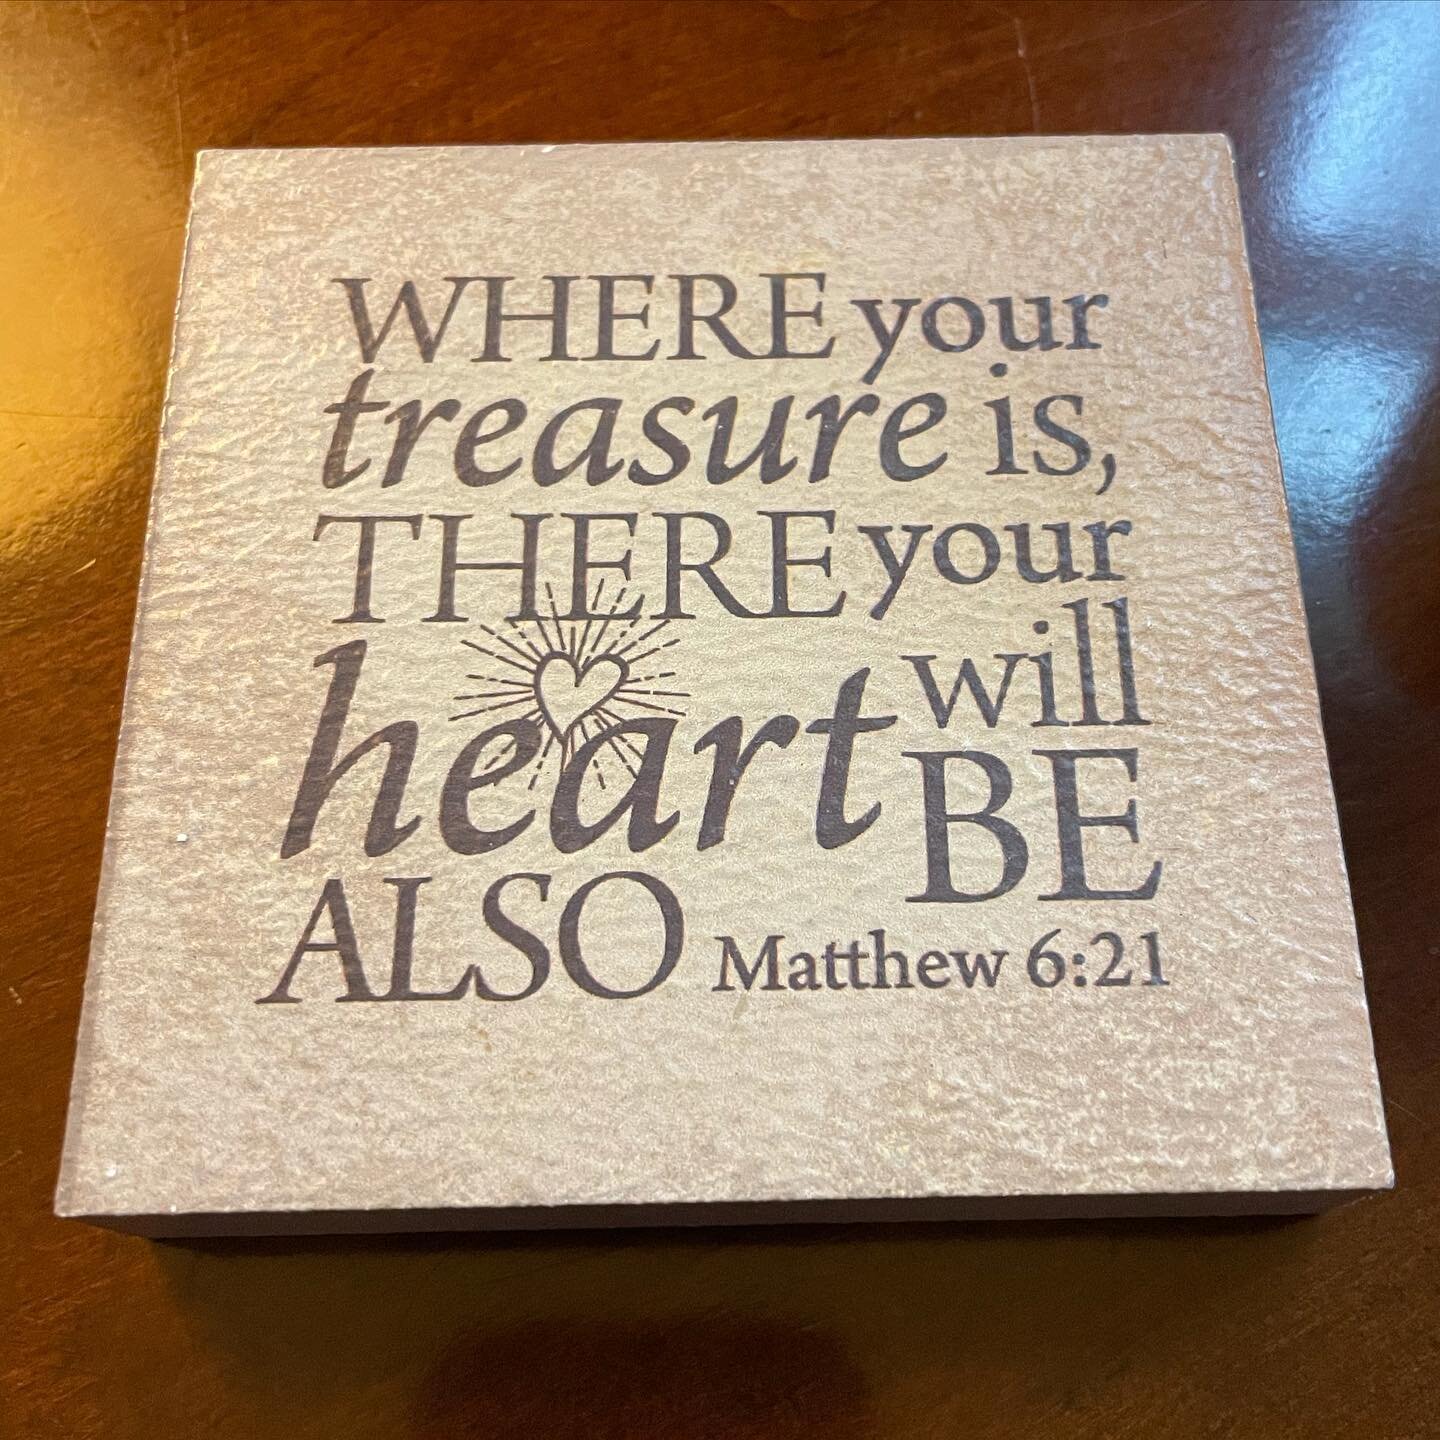 This has been on my desk for over 3 years now, a gift from a sweet lady at a local church I preached for. It&rsquo;s been a constant reminder and blessing to me!